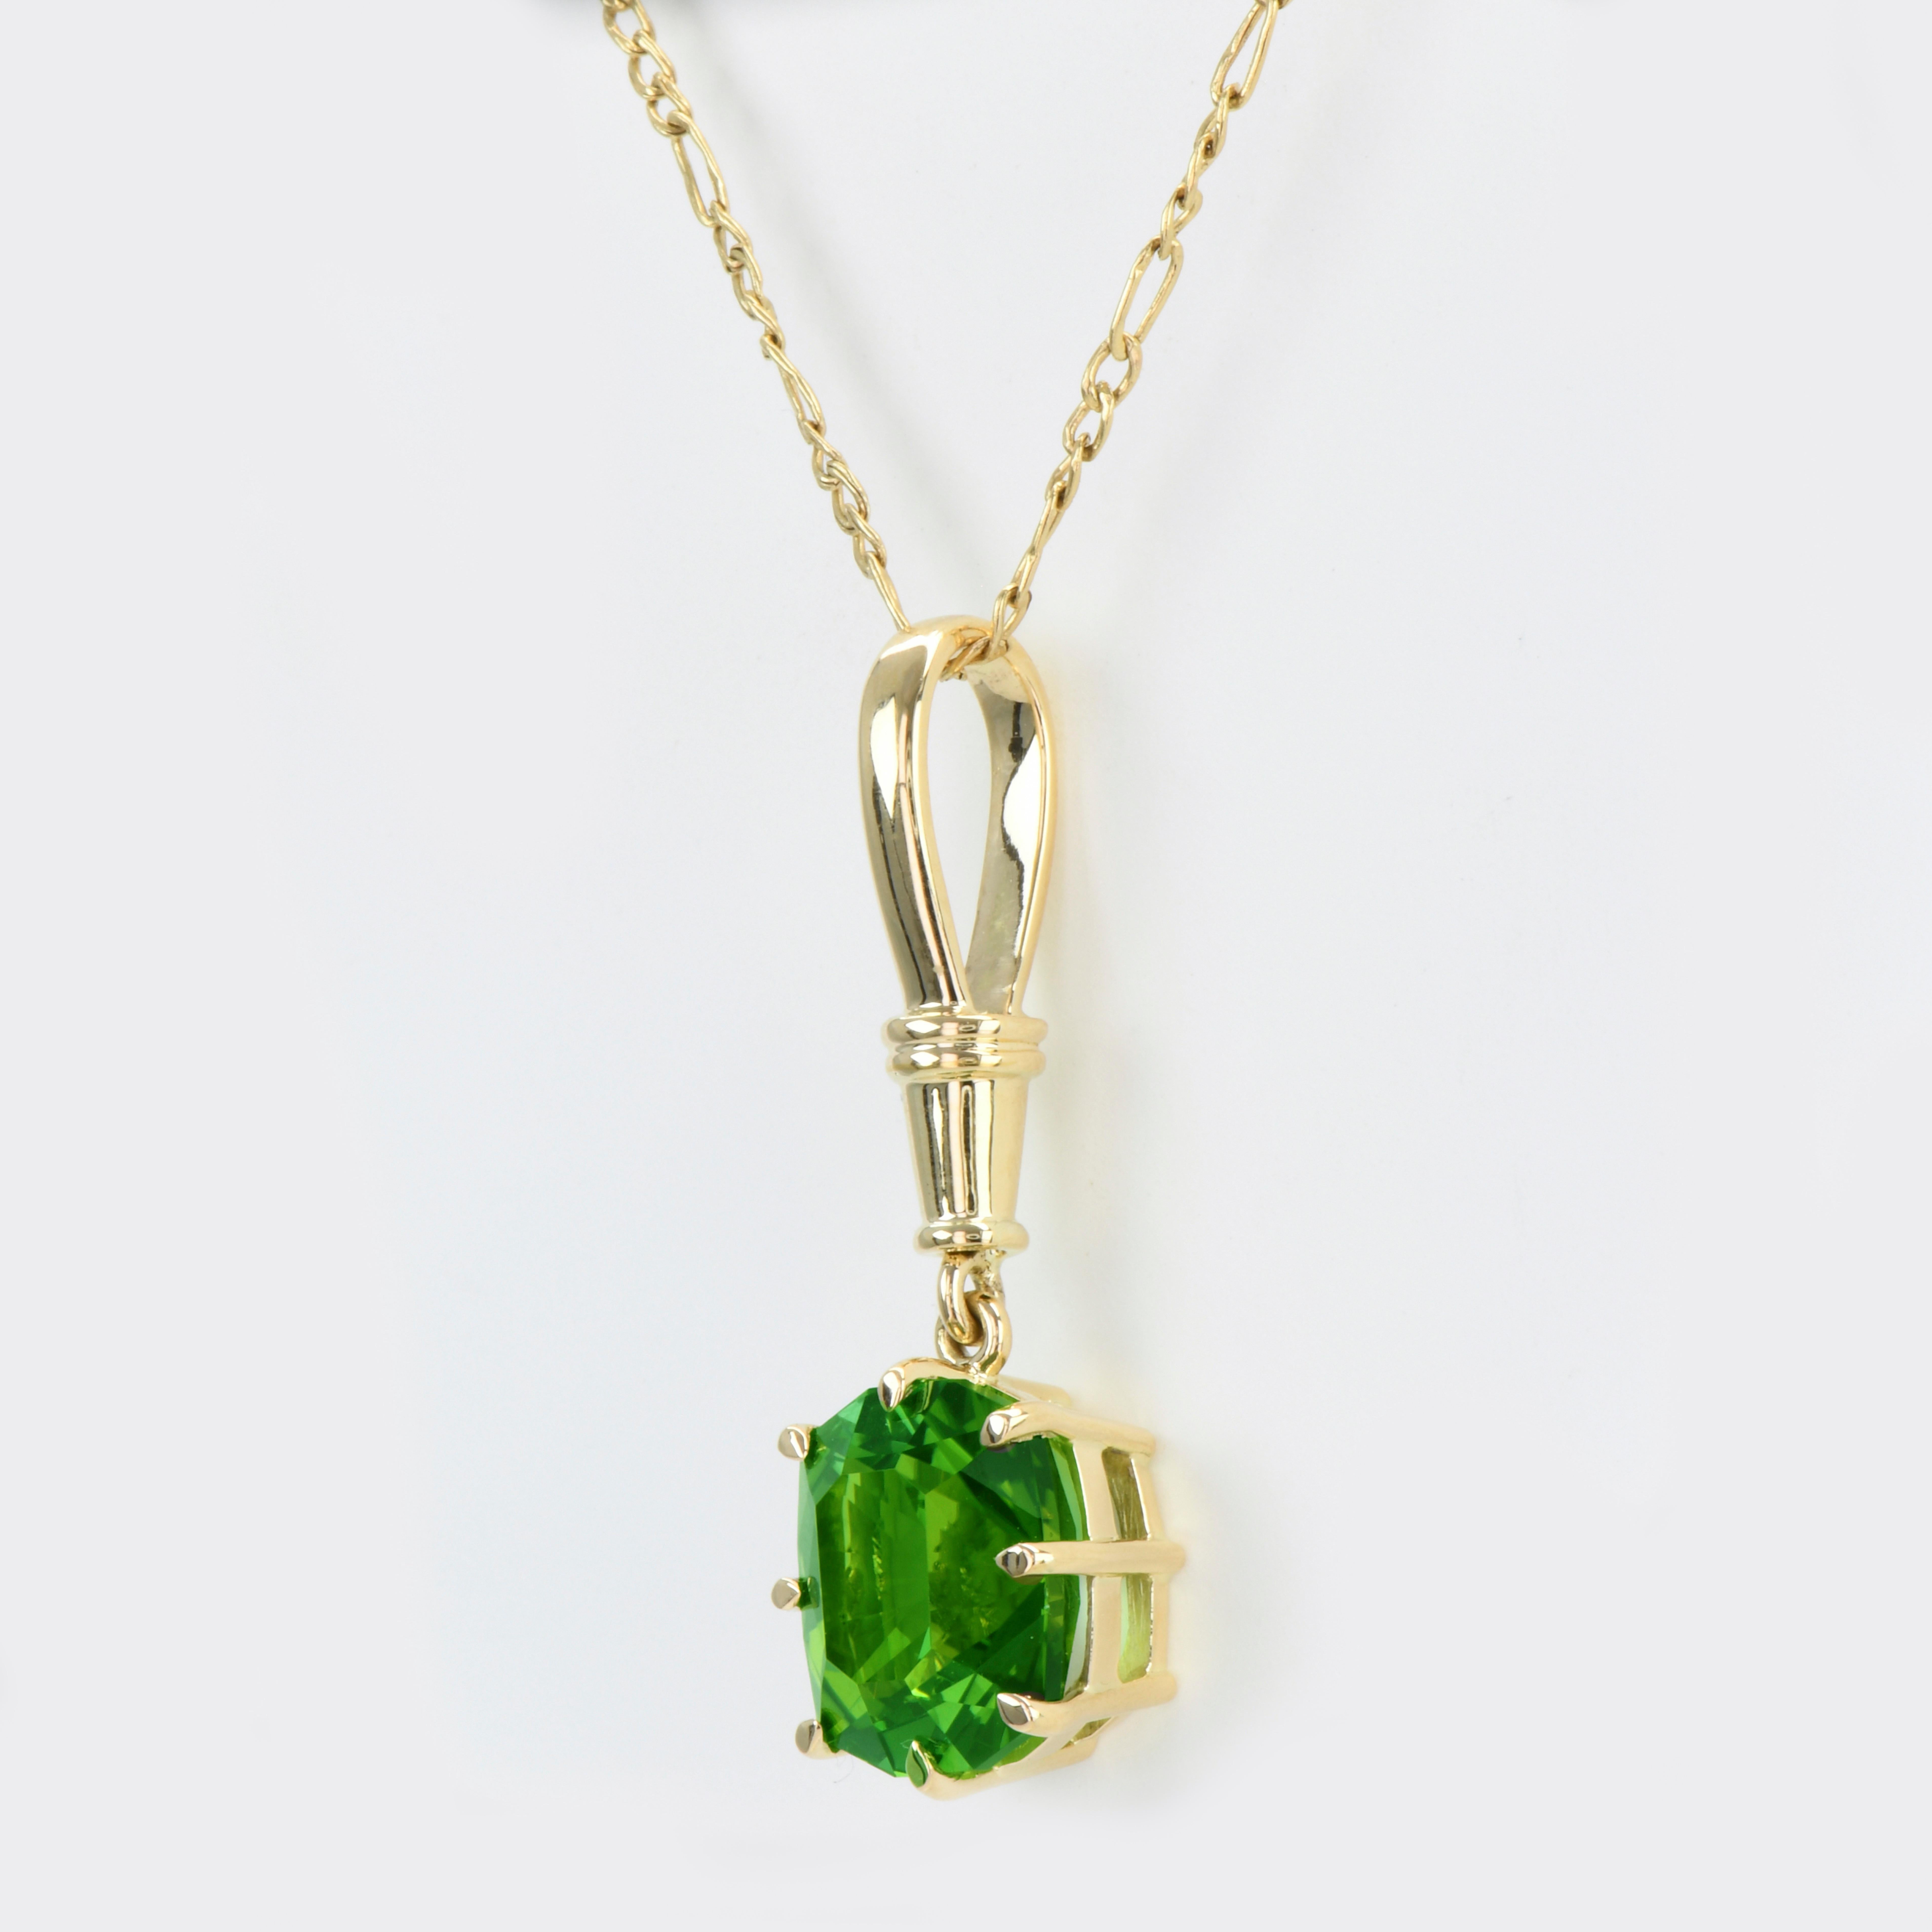 Modern 6.64ct Green Tourmaline Pendant-Barion Cut, 18KT Yellow Gold, GIA Certified-Rare For Sale